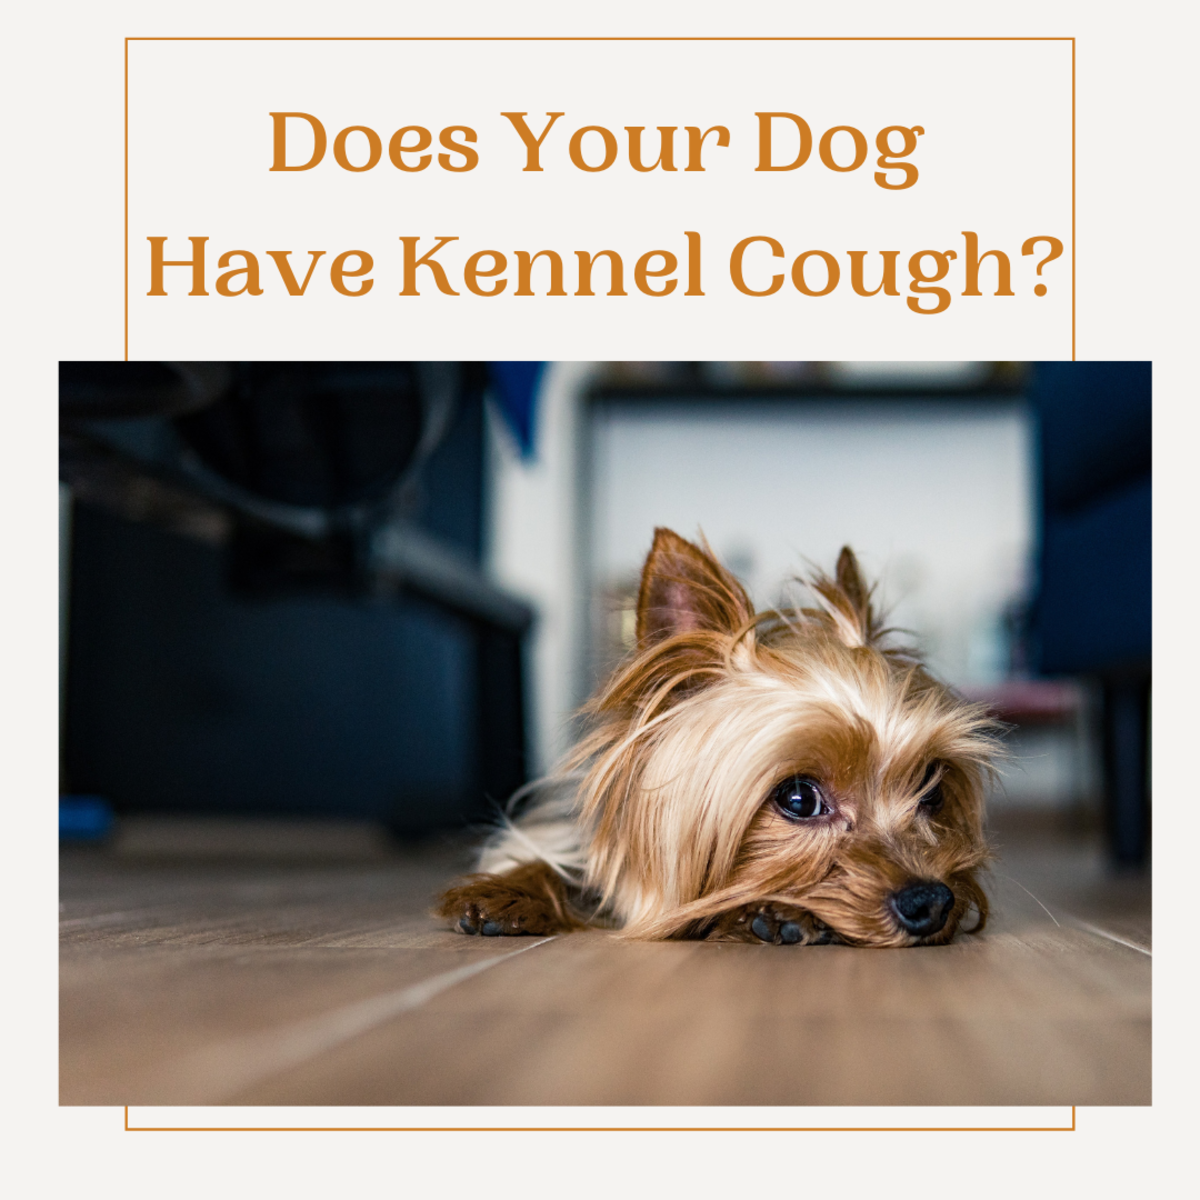 Kennel Cough Symptoms and Ways to Help Your Dog Stay Comfortable